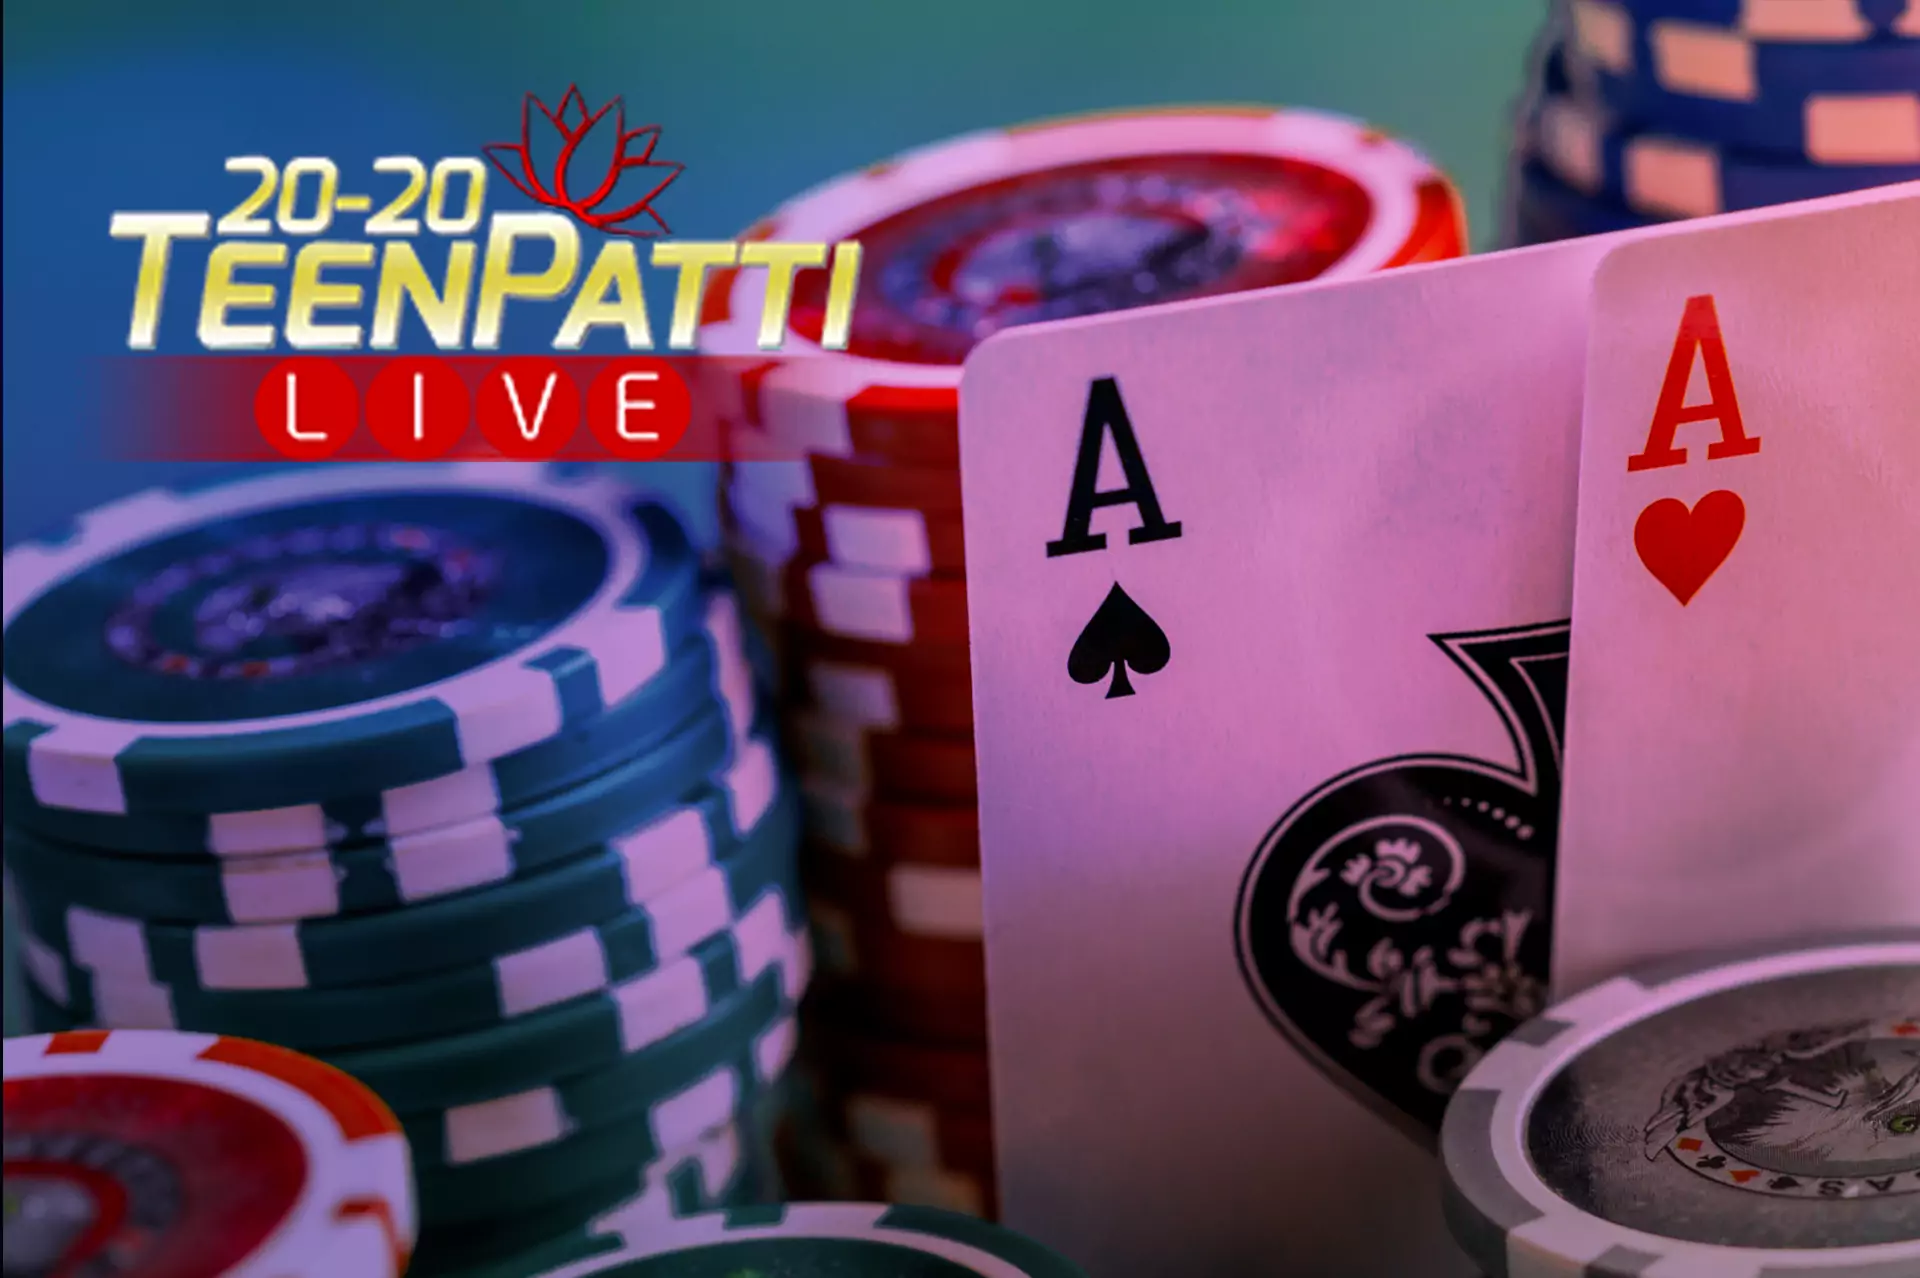 Teen Patti has the simplest rules of any chance games.